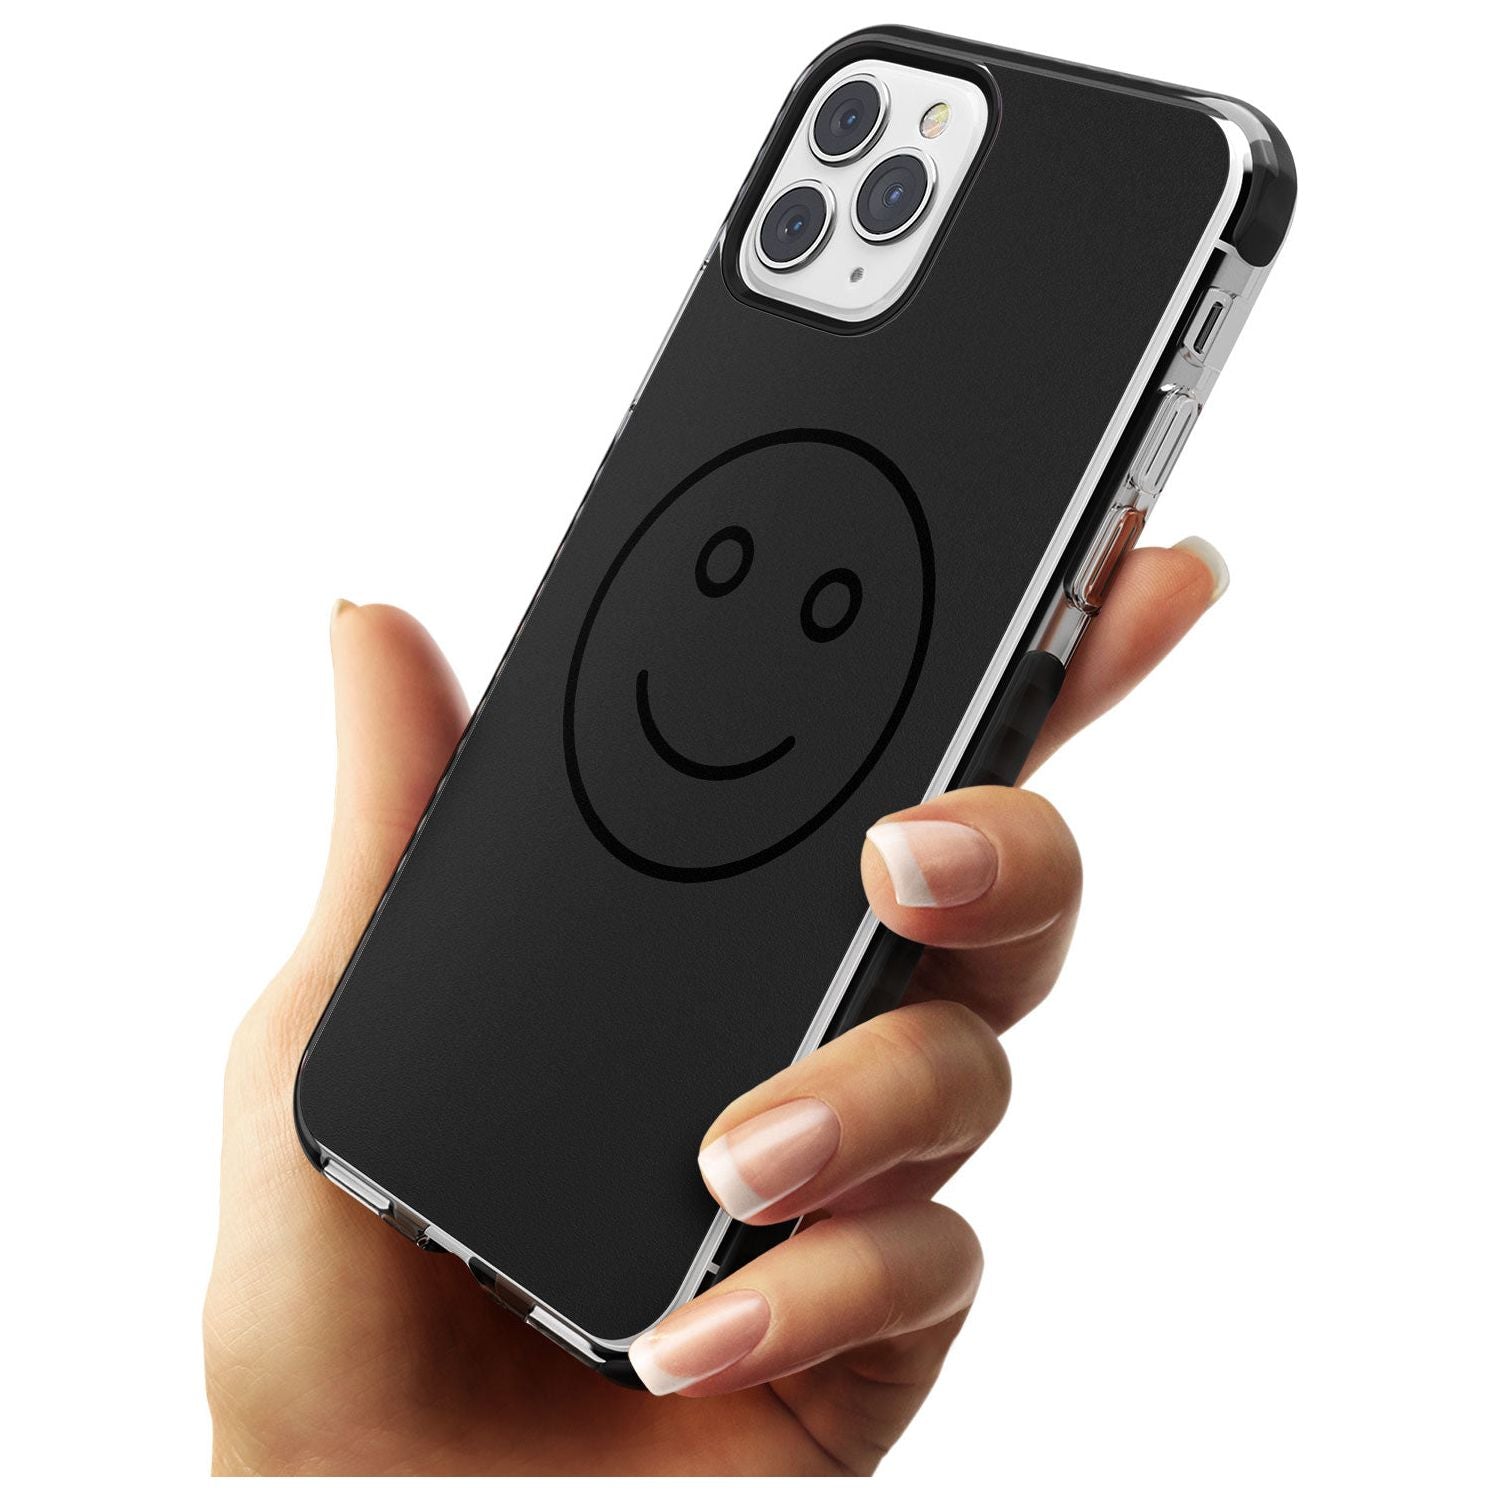 Dark Smiley Face Black Impact Phone Case for iPhone 11 Pro Max